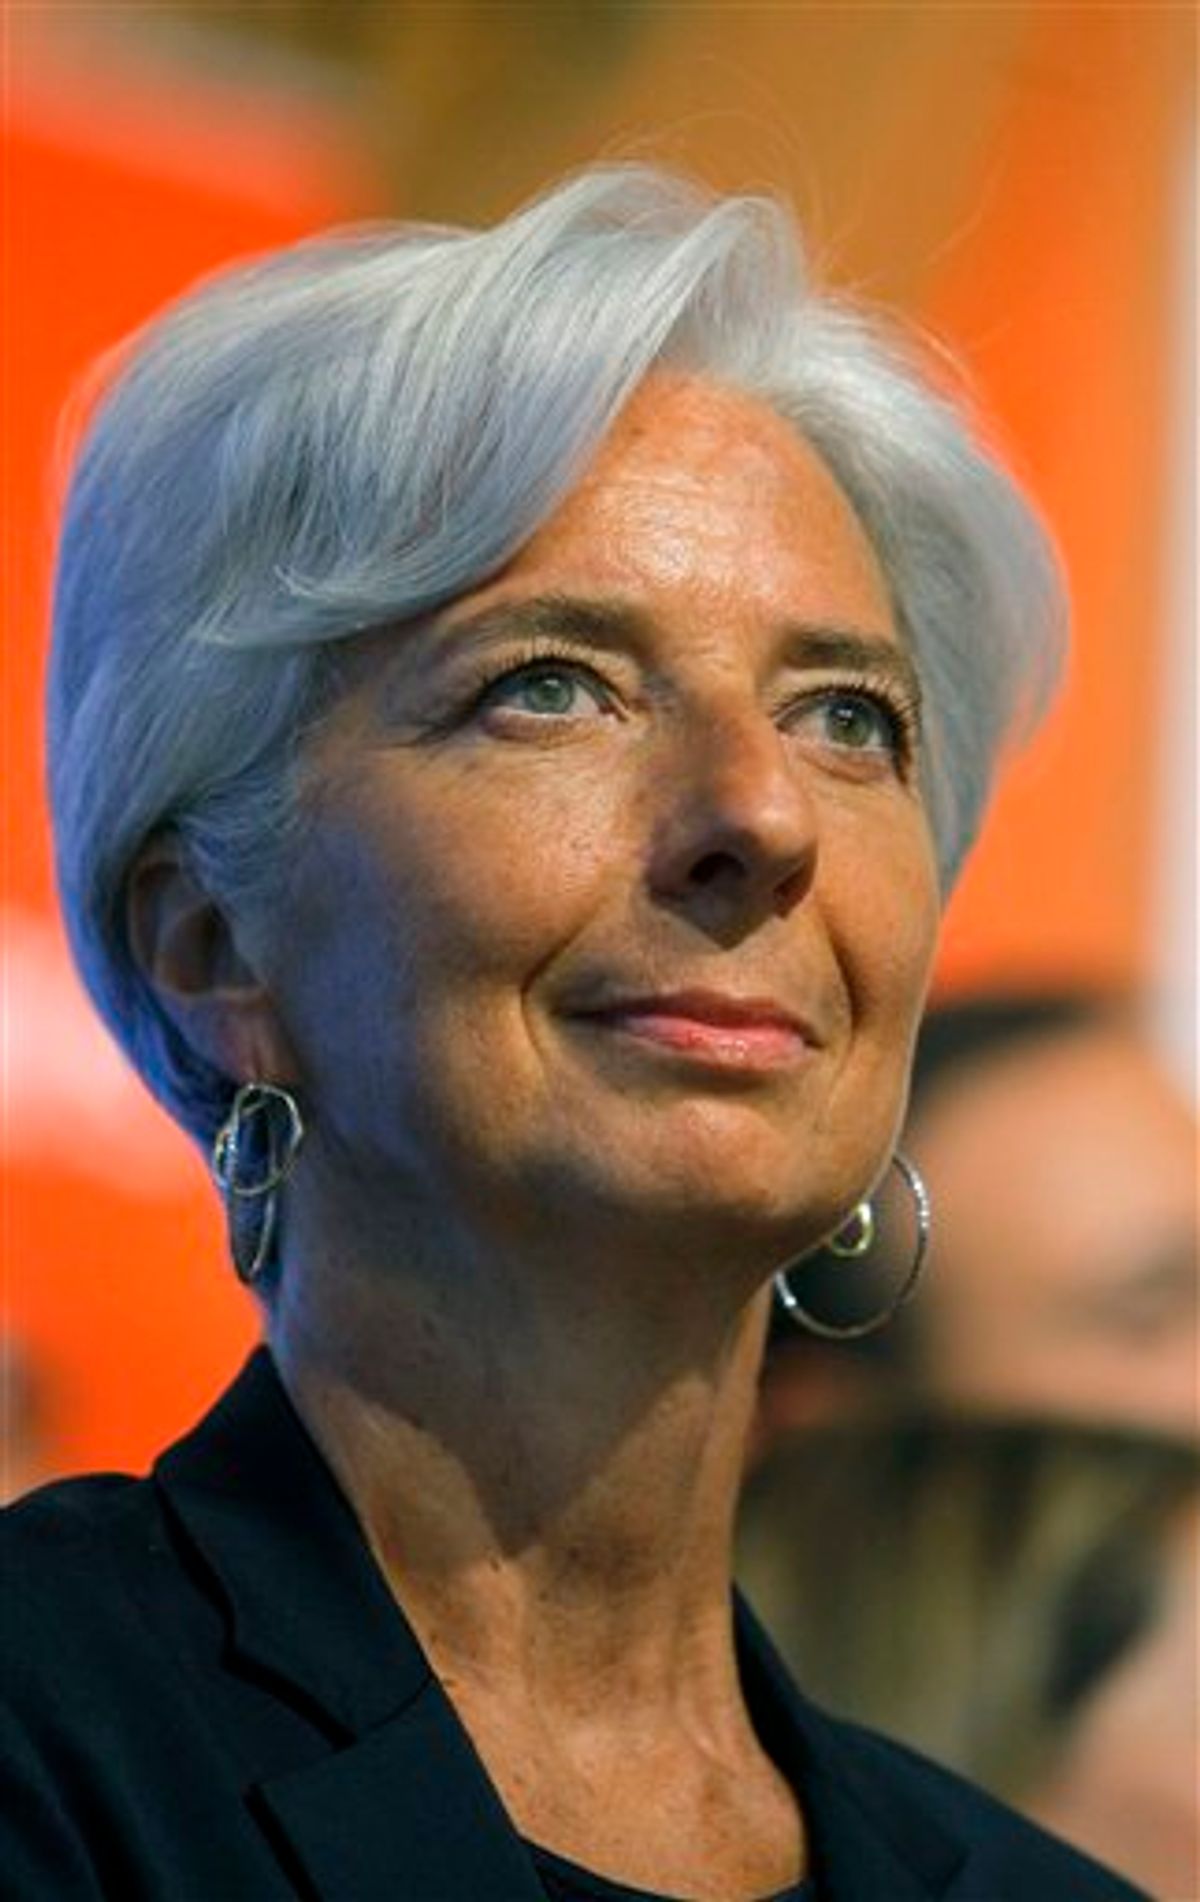 France's Finance and Economy Minister Christine Lagarde is seen during the ringing of the opening bell at the Paris Euronext opening day Tuesday, May 24, 2011. Momentum grew for  Lagarde's potential candidacy to the top job at the IMF, with the Netherlands becoming the latest European government to offer its support. The Frenchwoman, however, kept silent about whether she even wants the job. (AP Photo/Jacques Brinon) (AP)